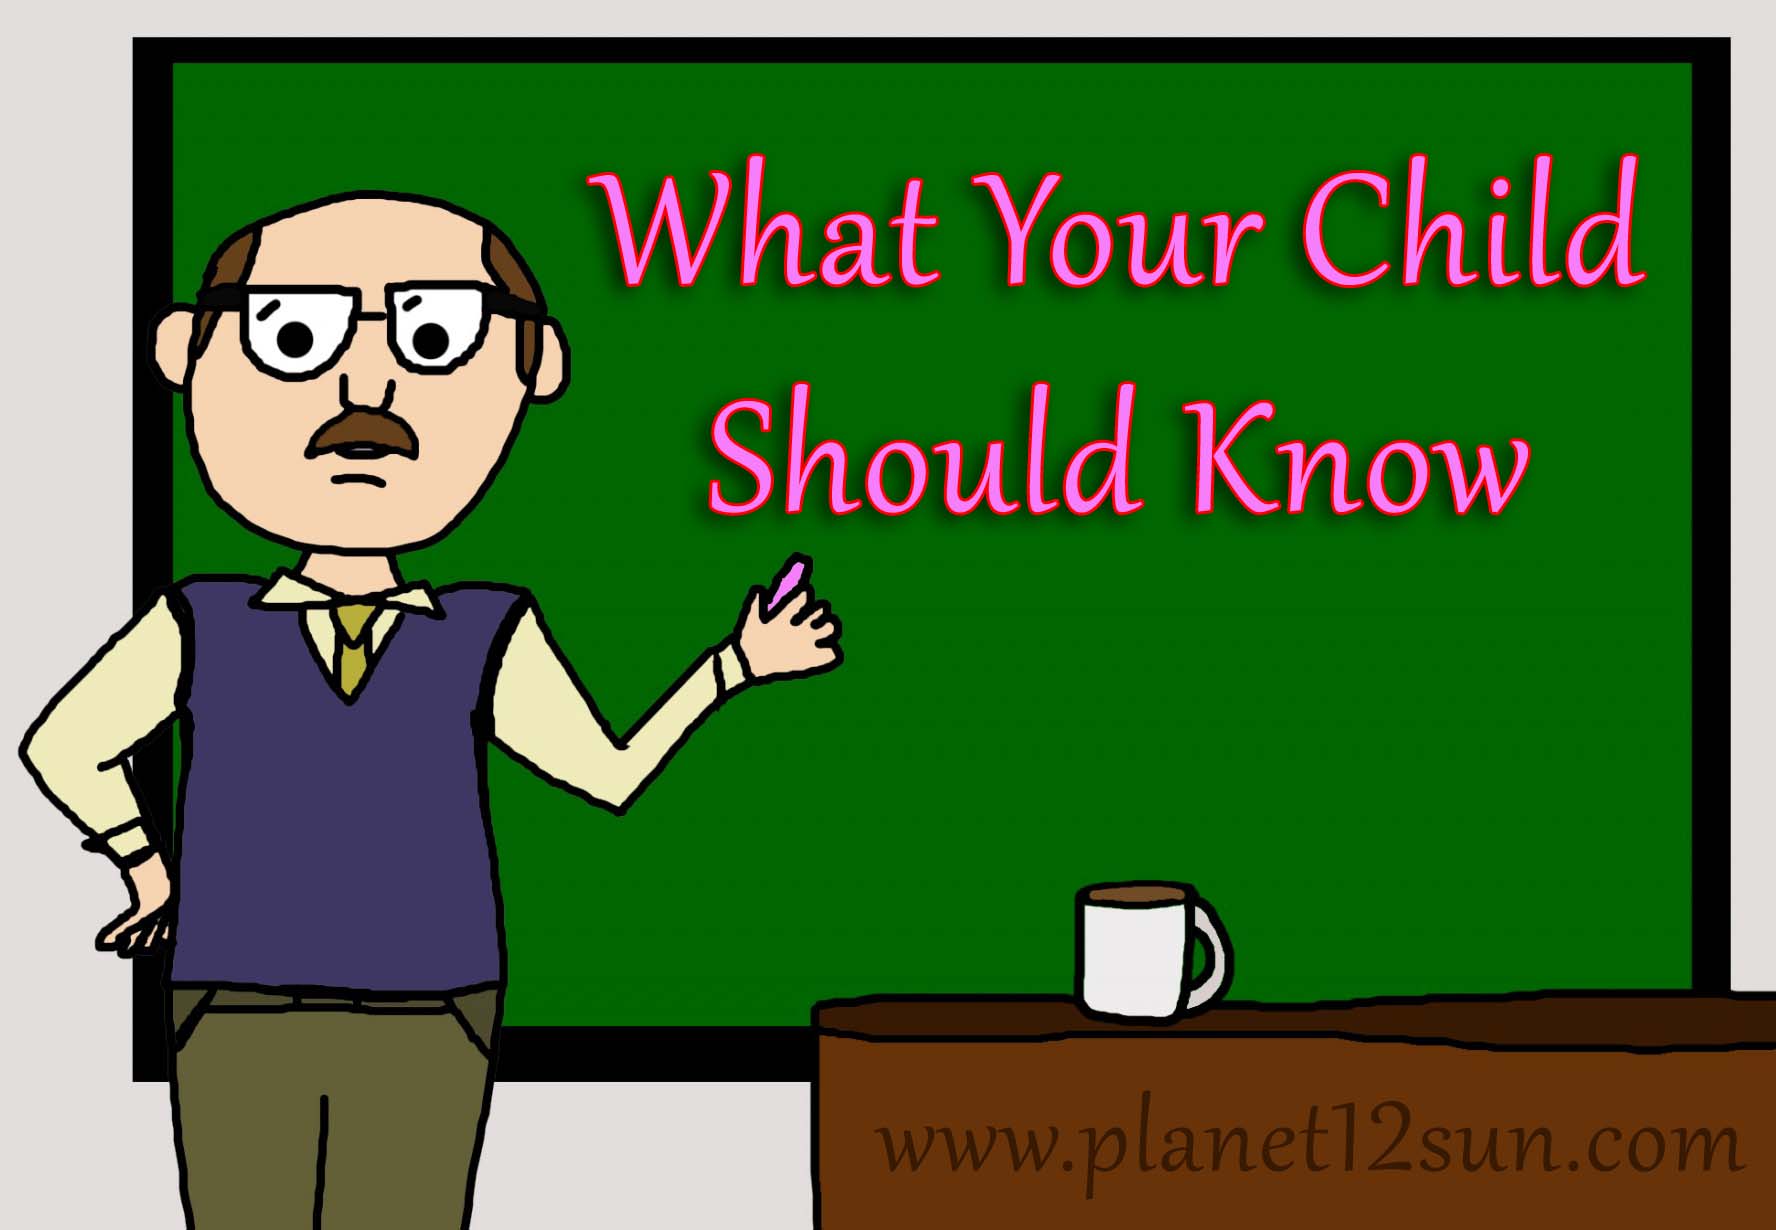 What should your child know